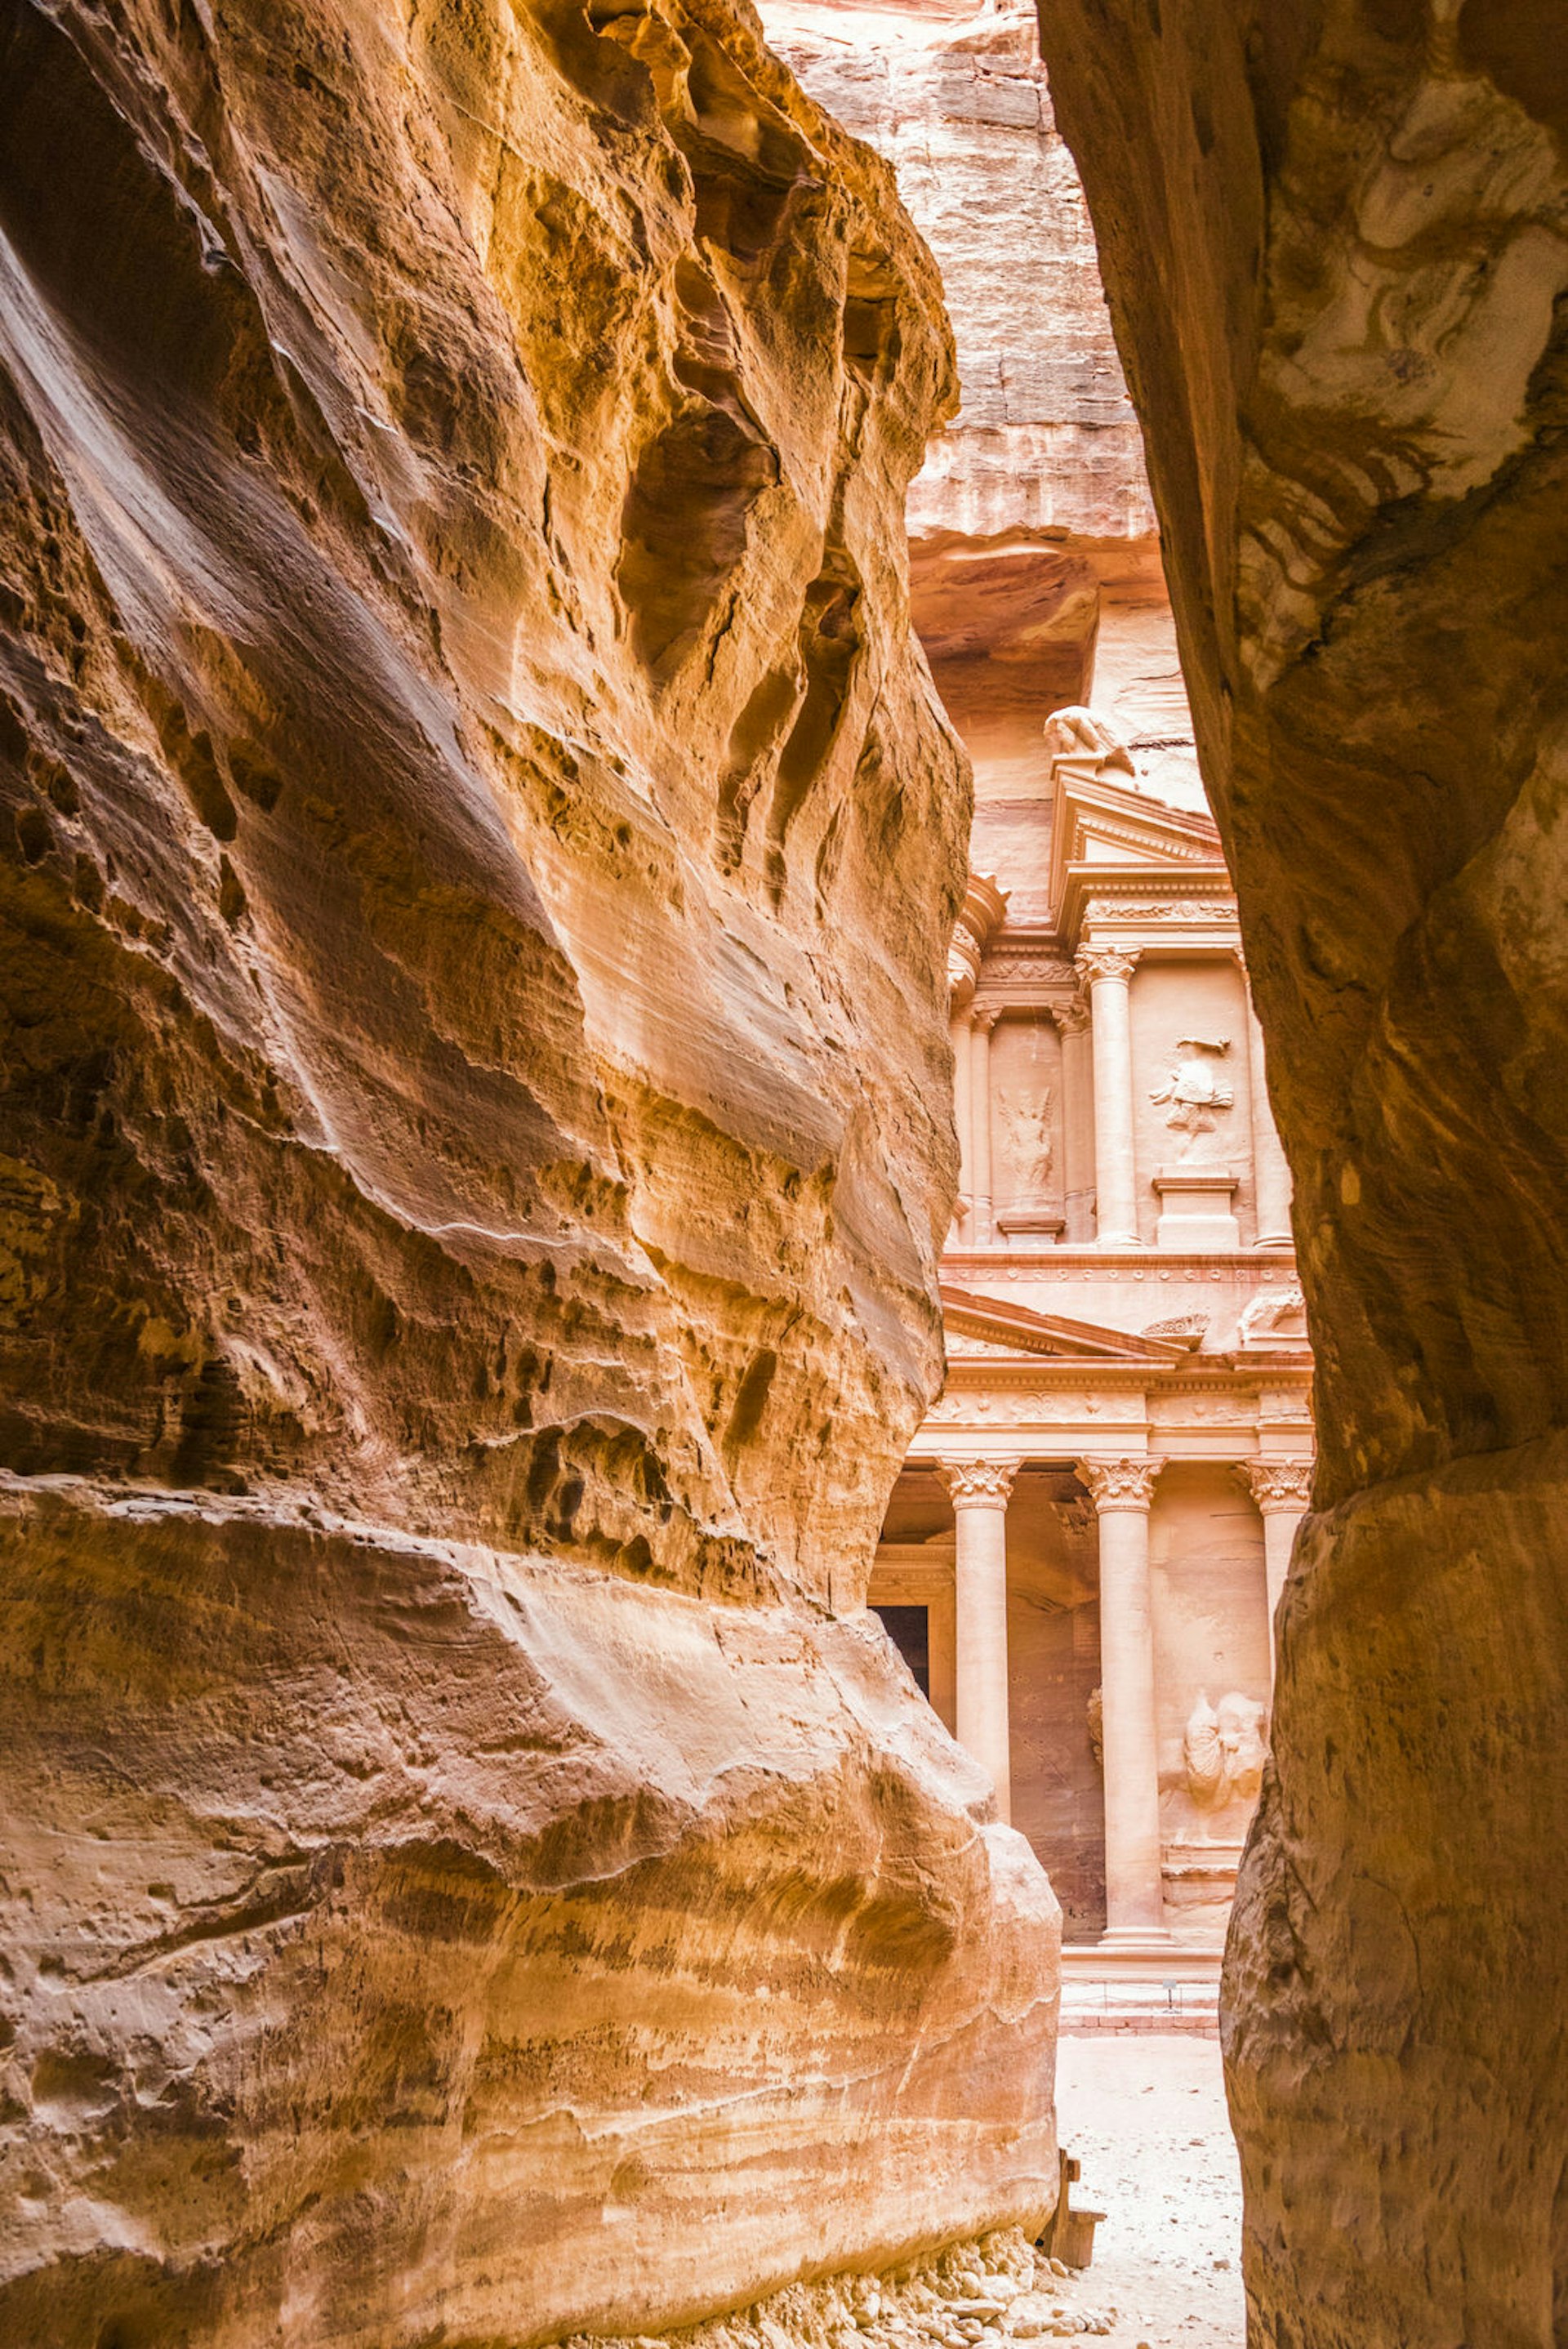 A first glimpse of the Treasury from the Siq, a natural fissure in the sandstone rocks of Petra ©Tom Mackie / Lonely Planet 